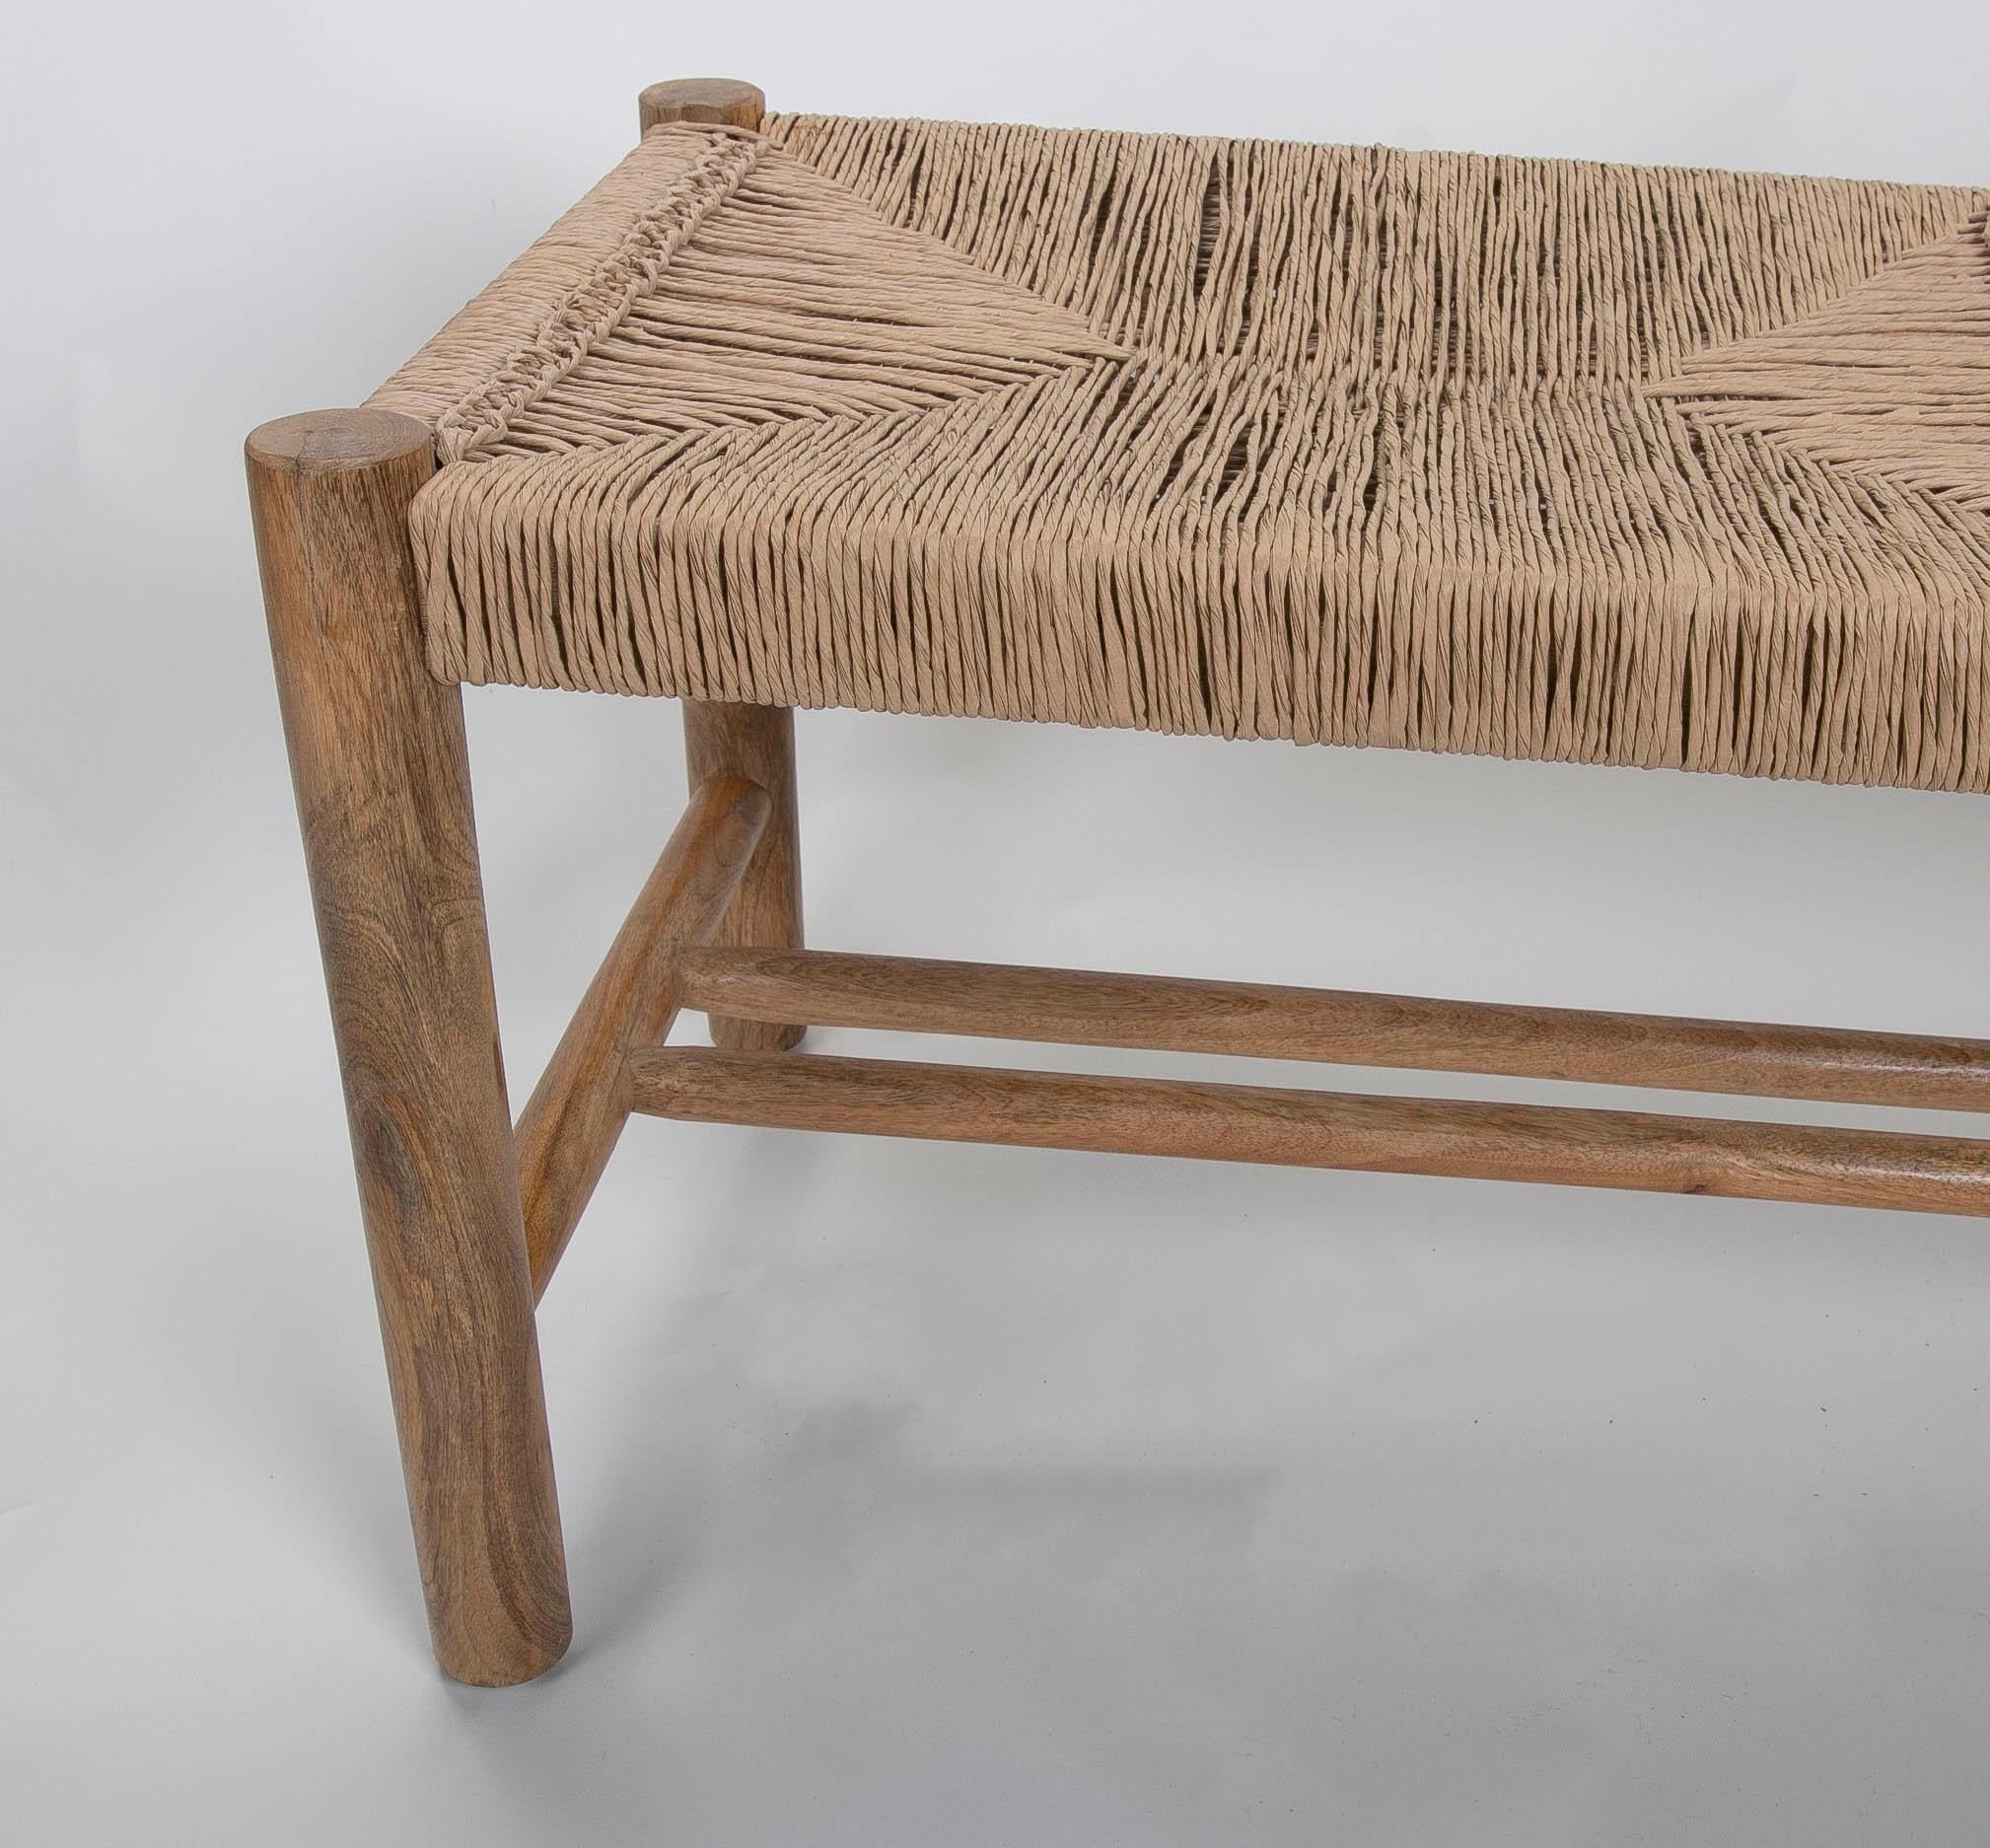 Wooden Stool with Hand-Braided Rope Seat For Sale 9